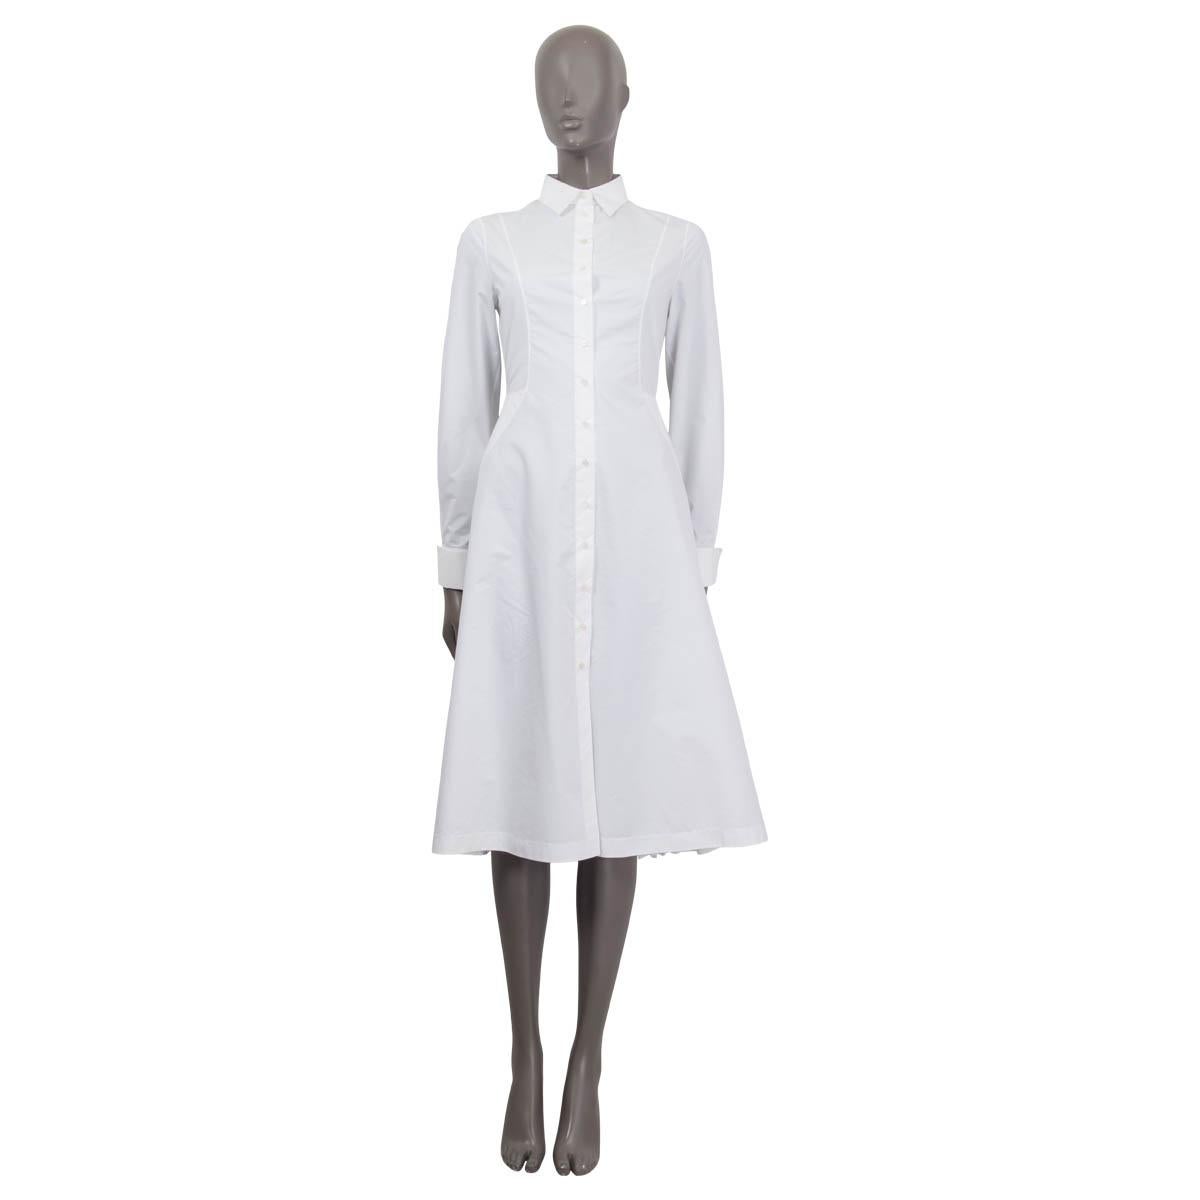 100% authentic Alaia a-line midi dress in white cotton (53%) and polyester (47%). Features buttoned cuffs, laser cut details and a waist belt at the back. Opens with fourteen buttons on the front. Unlined. Has been worn once and is in virtually new